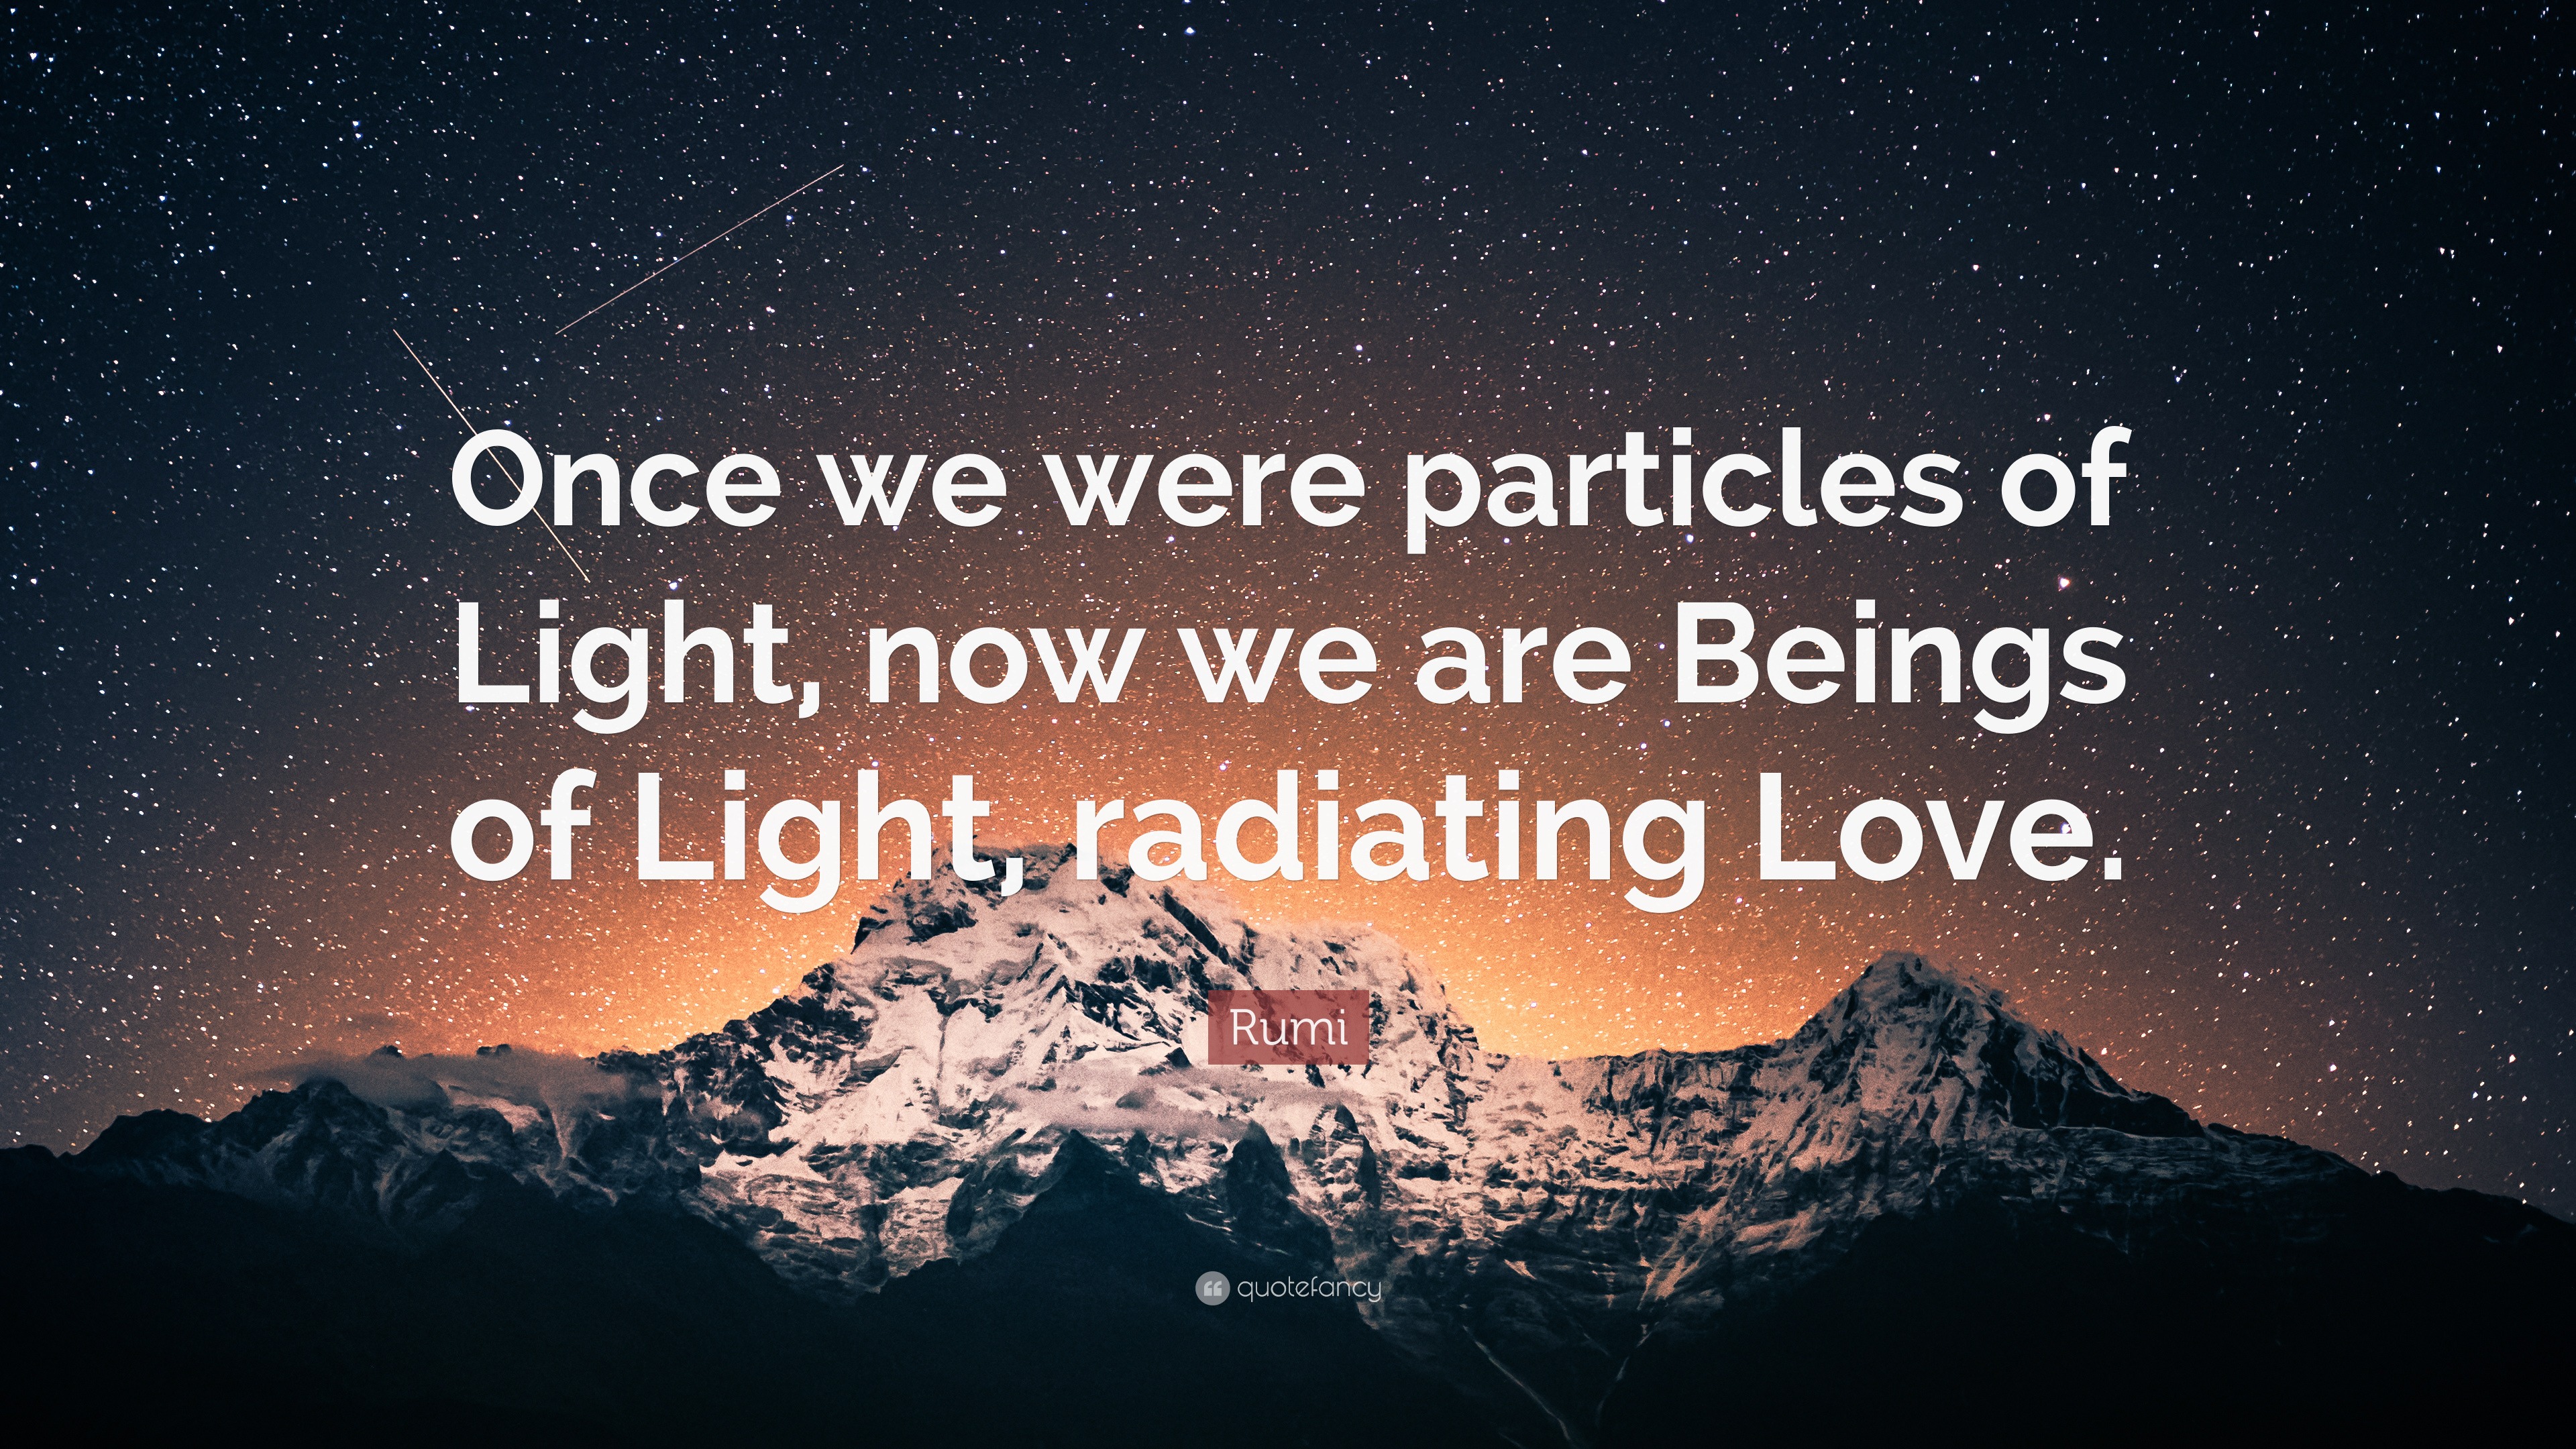 Rumi Quote: “Once we were of now we are Beings Light, radiating